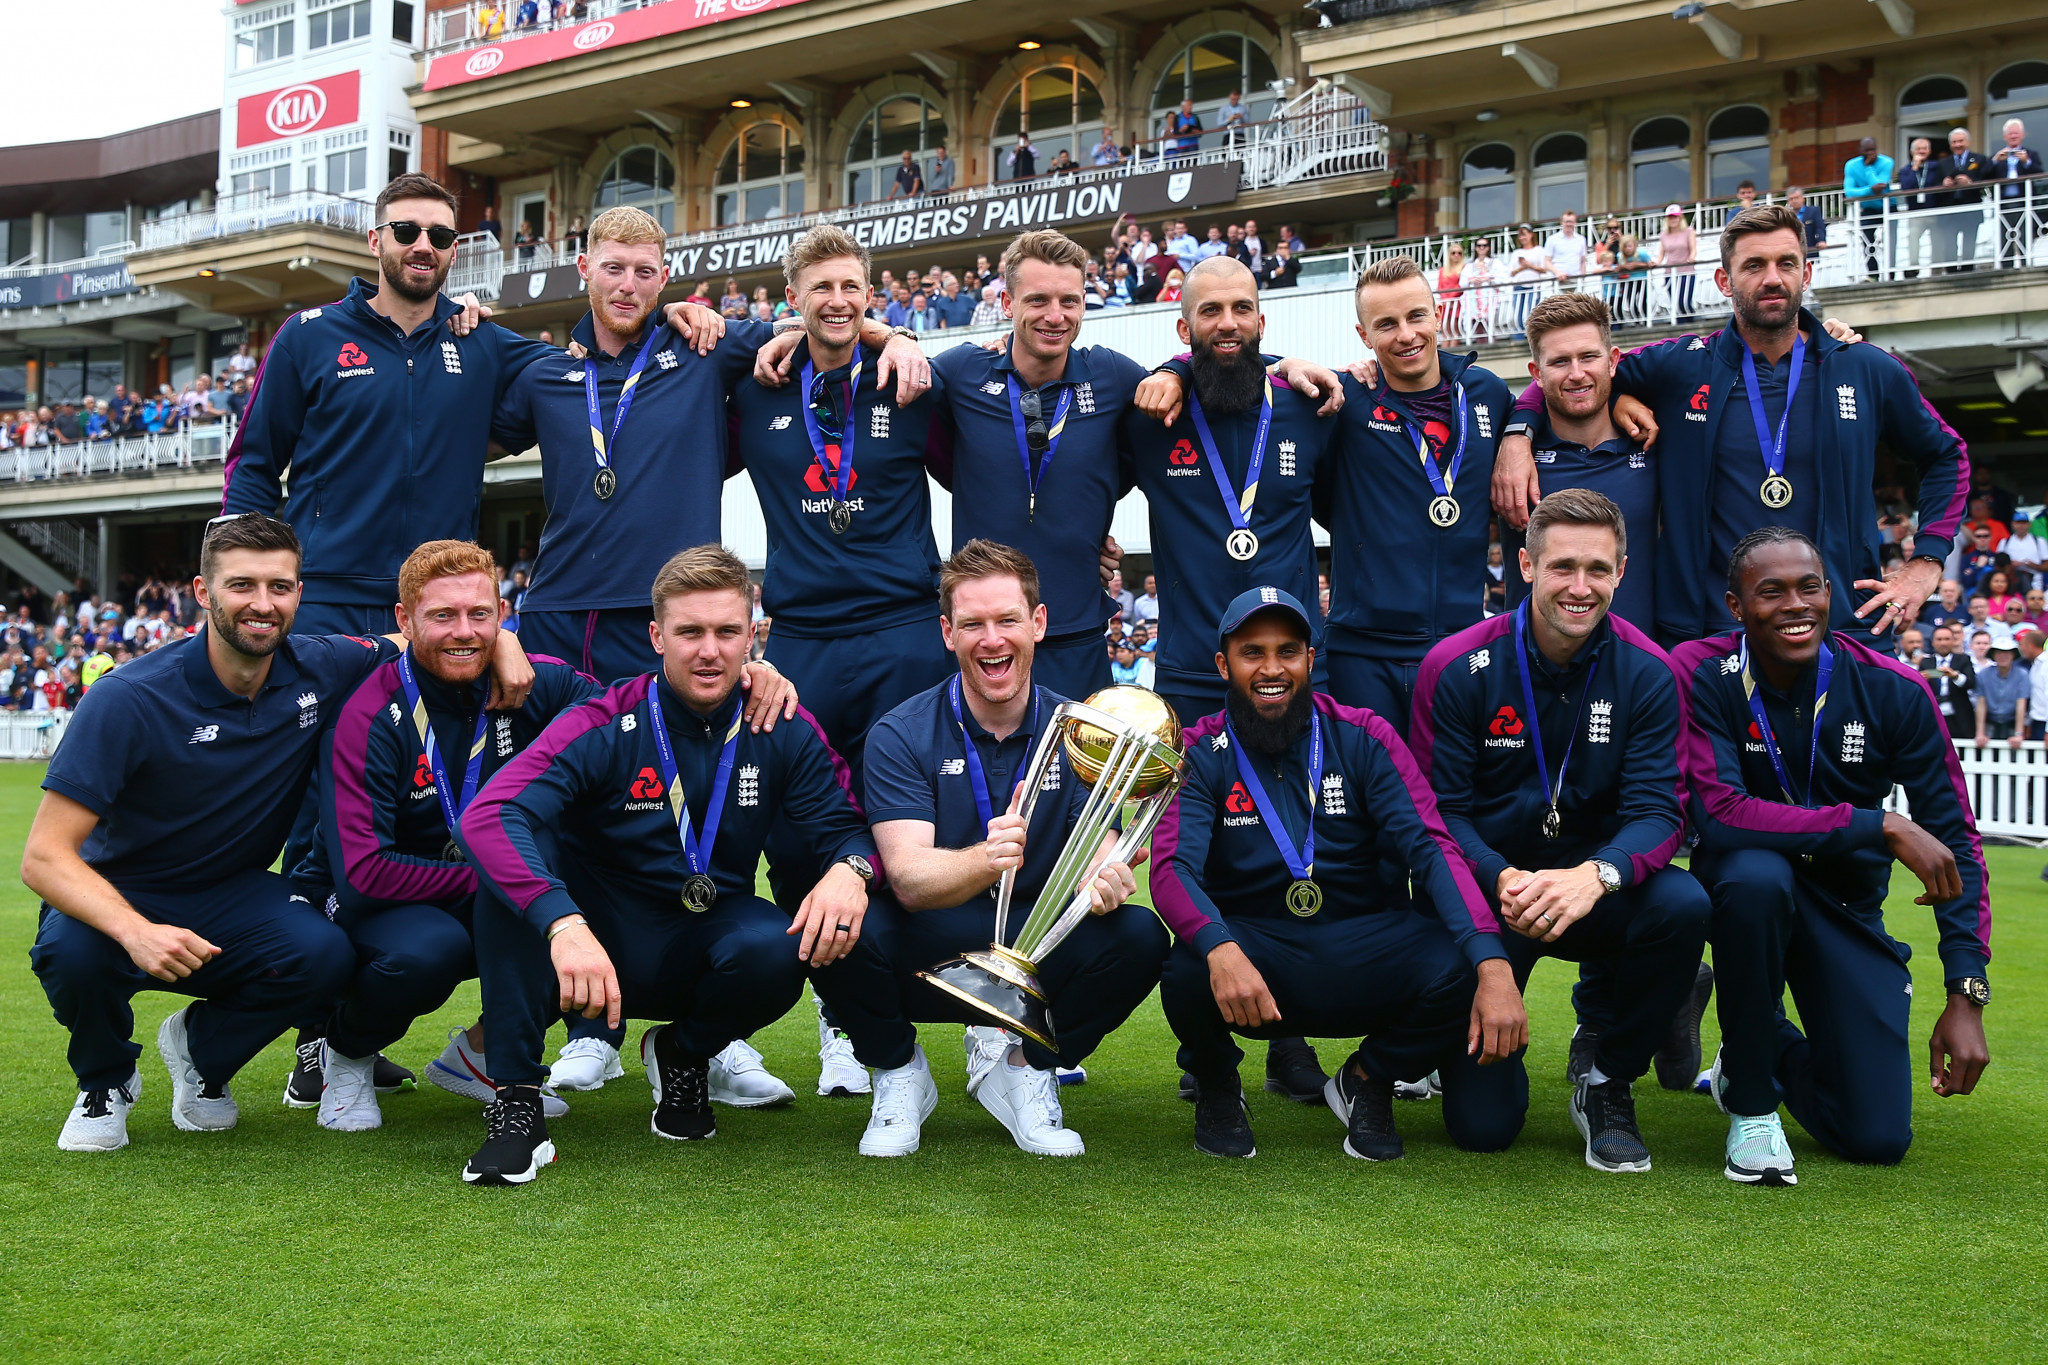 England celebrate winning the Cricket World Cup final against New Zealand ©Getty Images